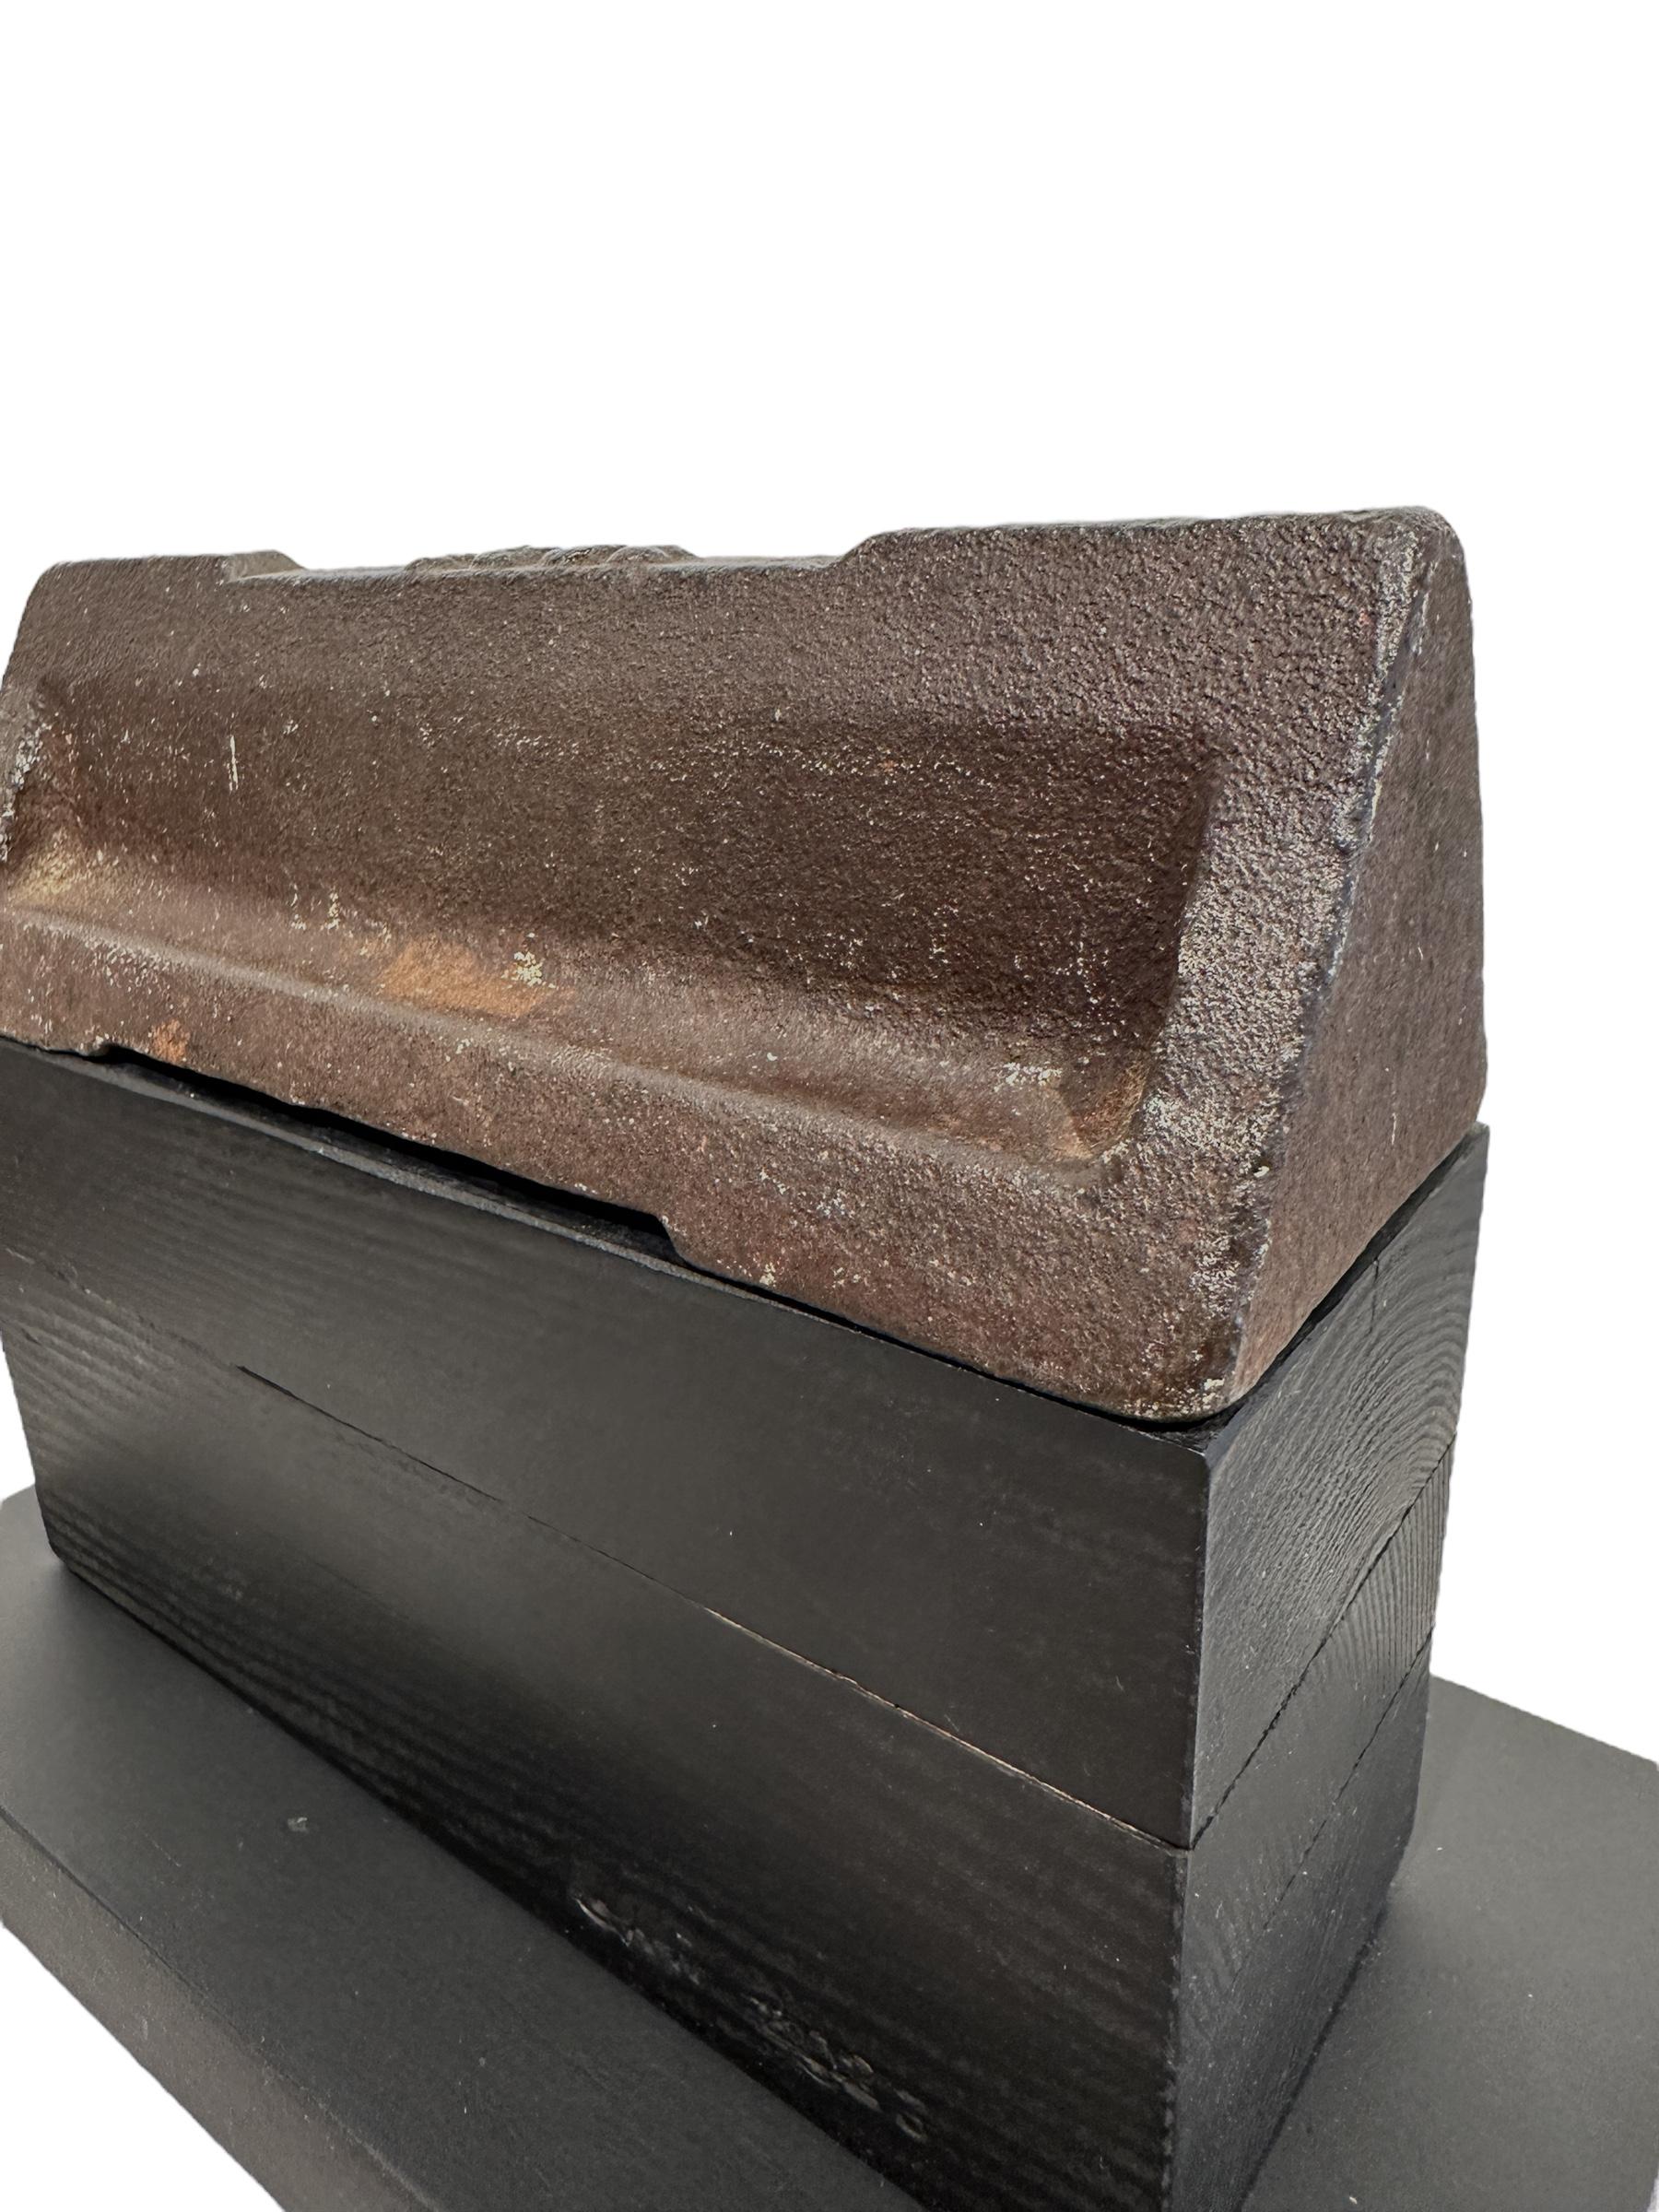 House Sculpture, Minimalist Modern Structure, Rusted Steel Wedge on Wood Blocks For Sale 1